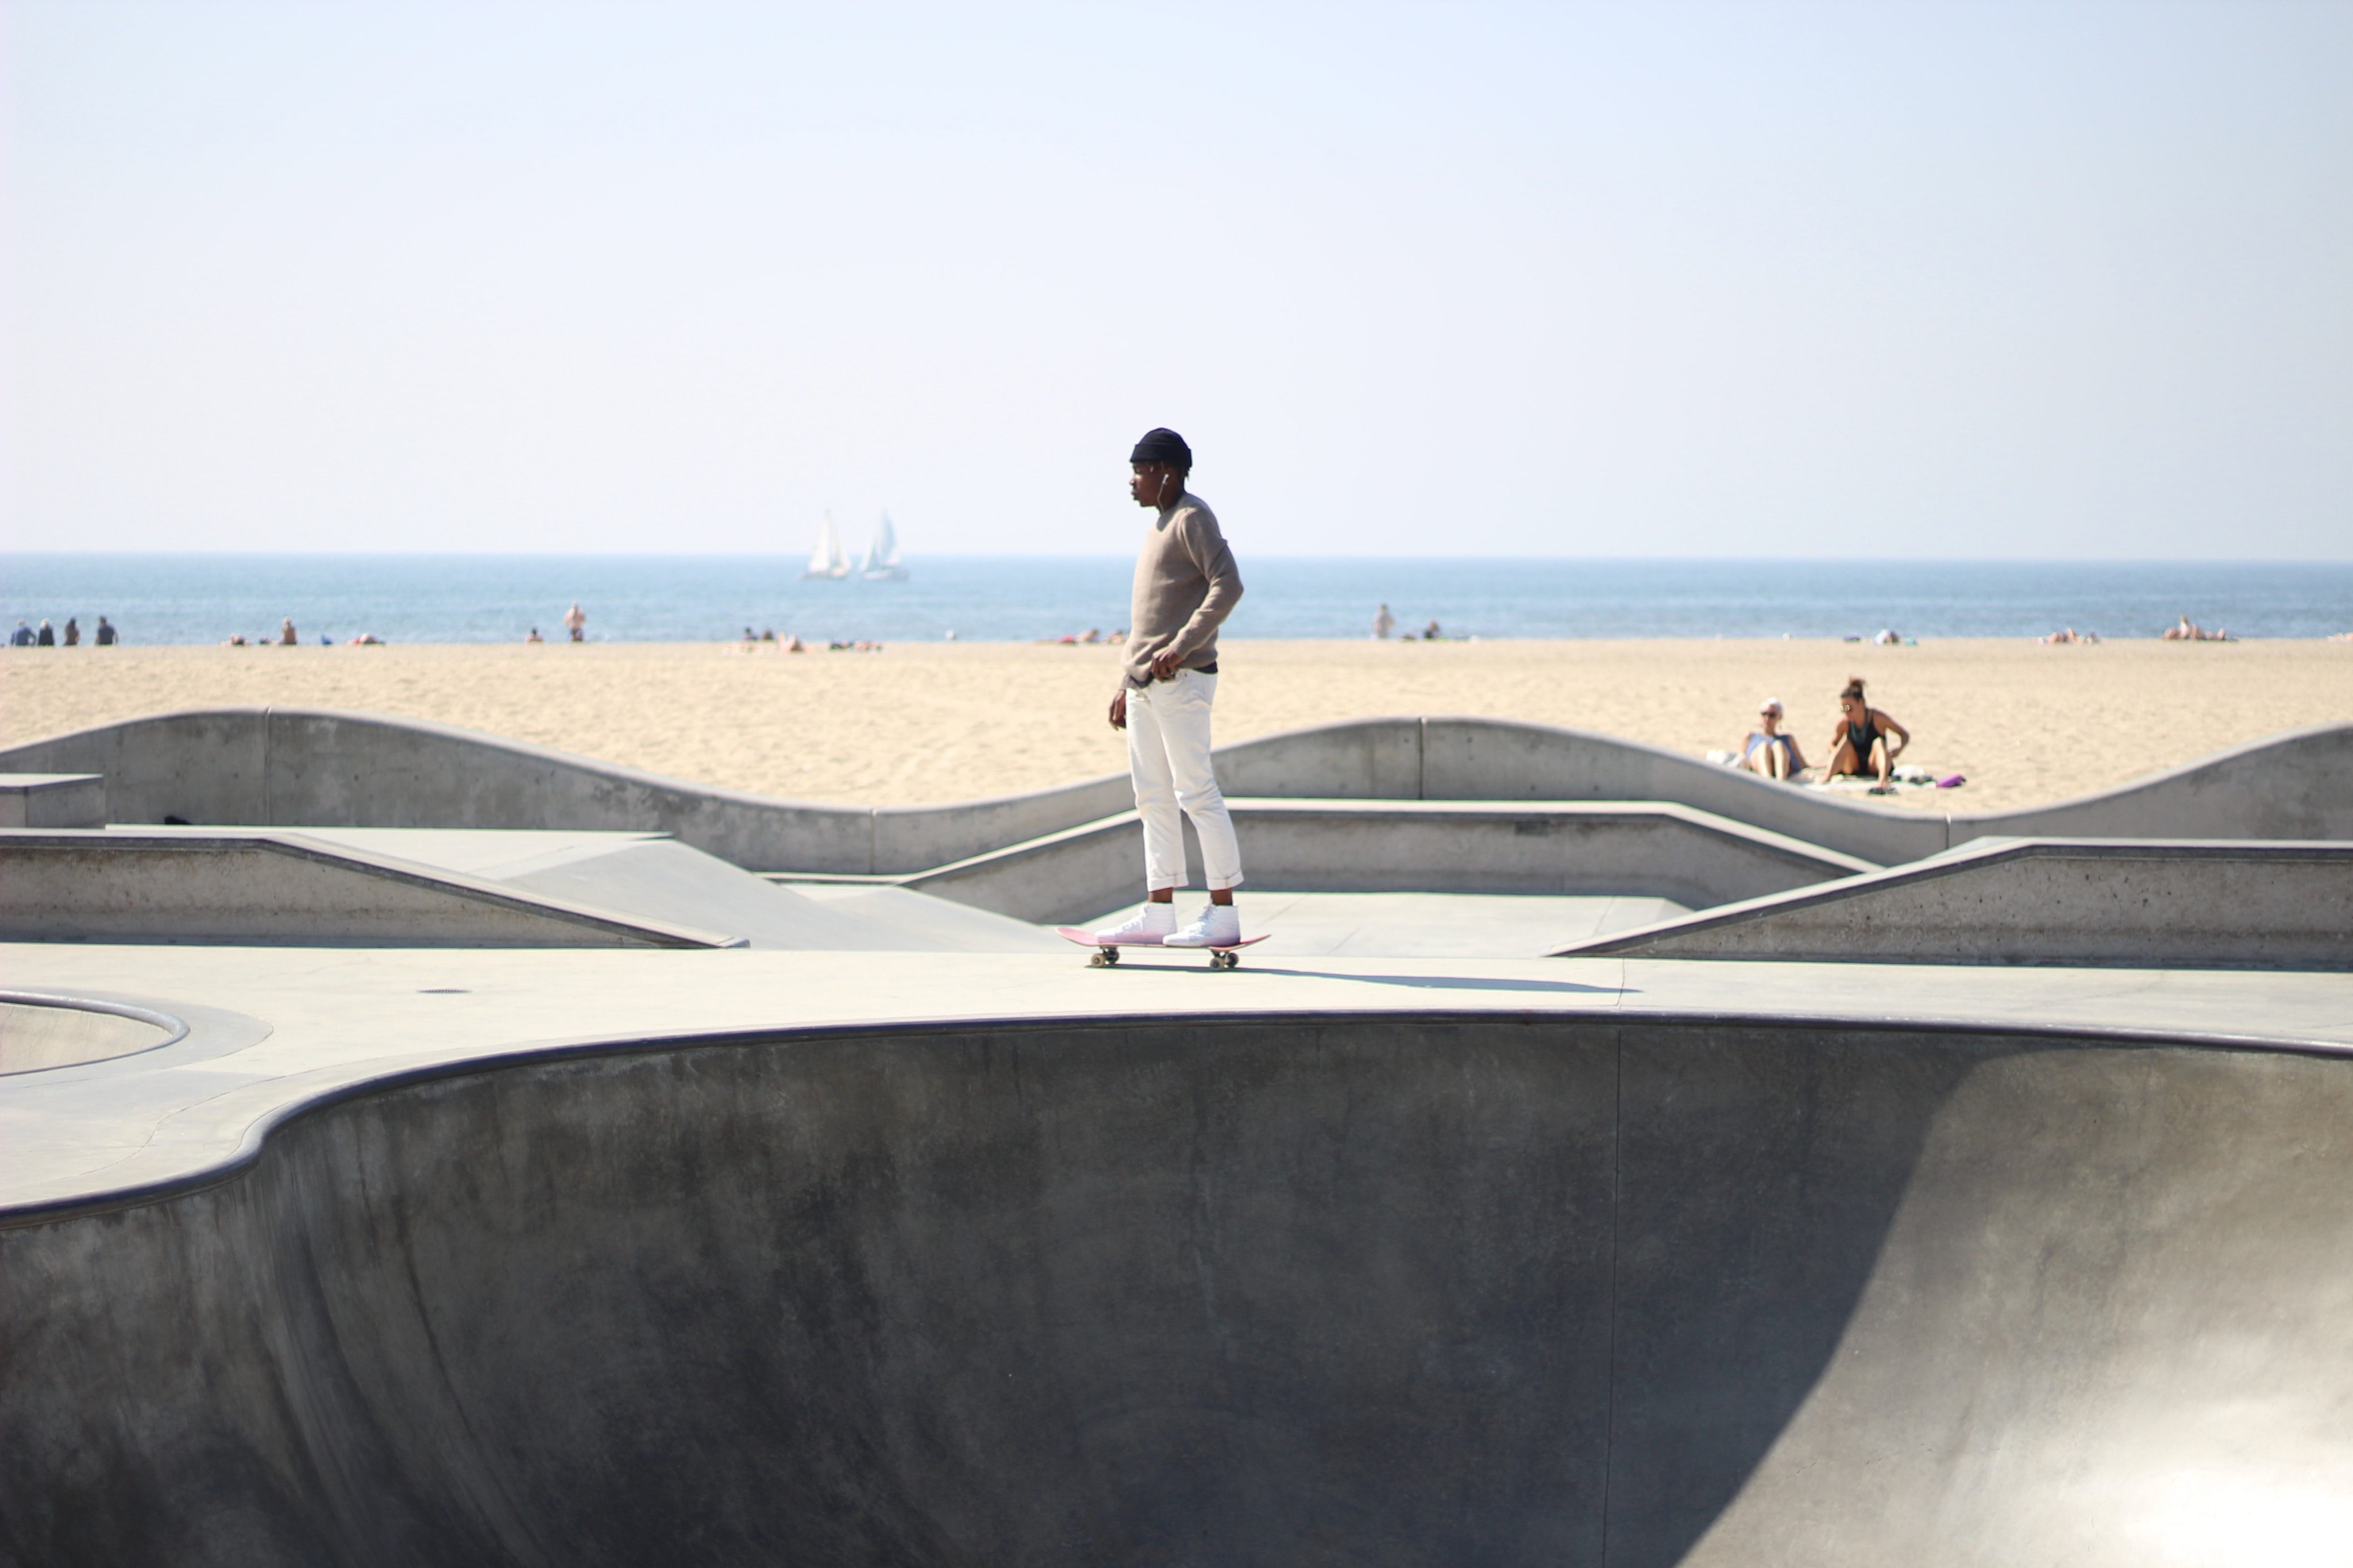 I was at the Venice Skatepark one day and I saw this amazing skateboarder and he asked me to take a couple of lifestyle pictures for him so I took this one really special one that reminded me of Childish Gambino’s song Kauai. man skateboarding